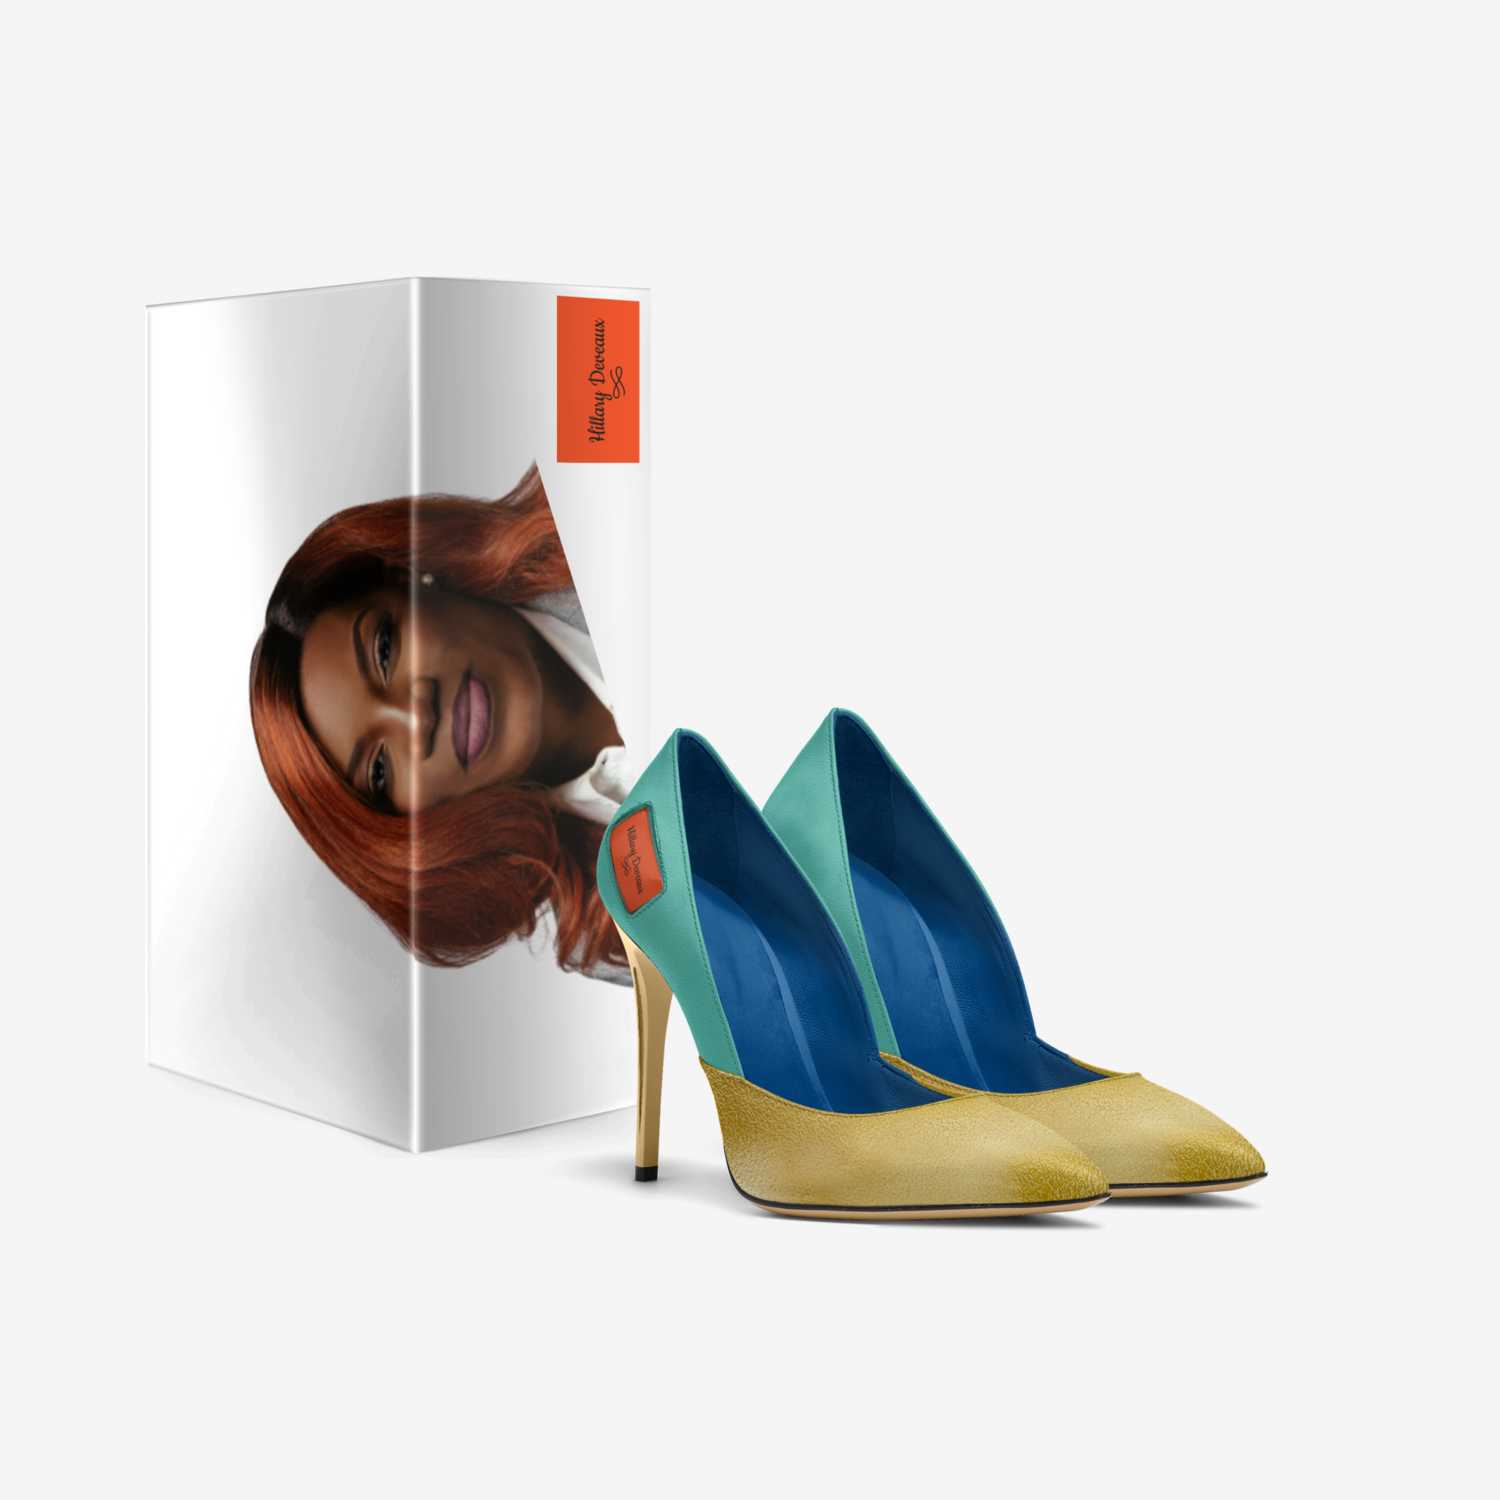 Hillary Deveaux custom made in Italy shoes by Hillary Deveaux | Box view